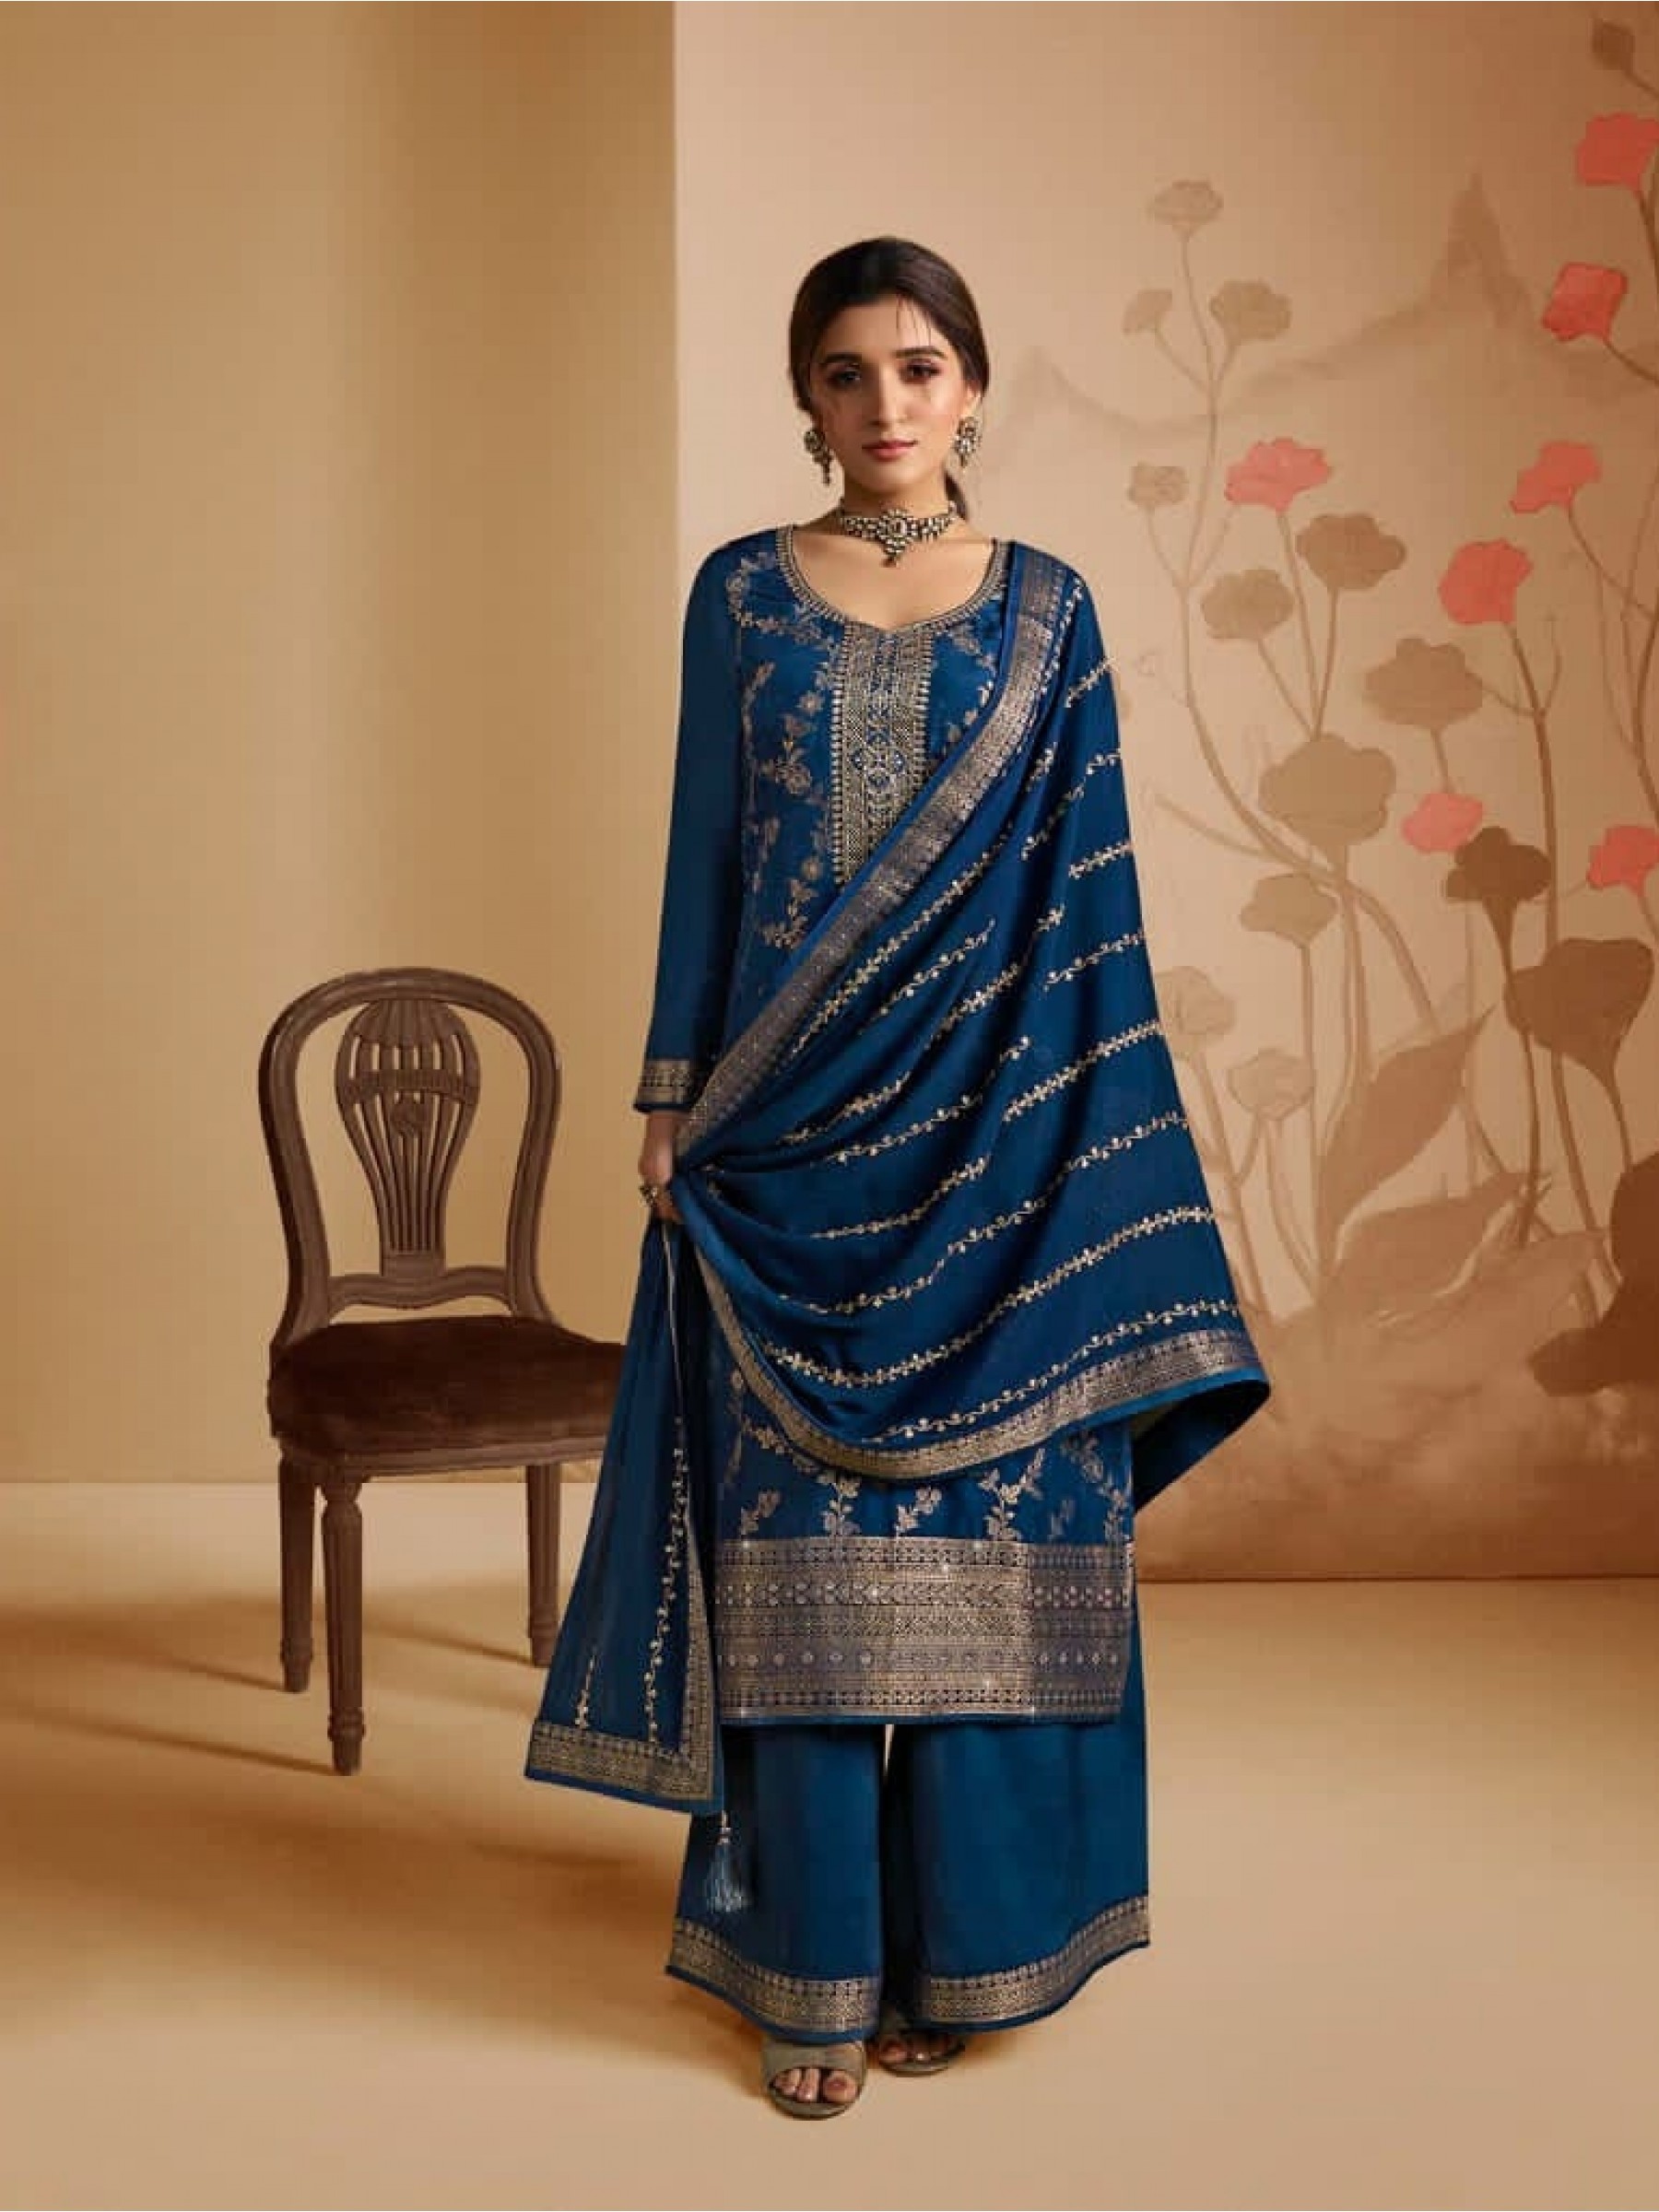 Pure Dola Jacquard  Silk Party Wear Suit in Teal Blue Color with Embroidery Work